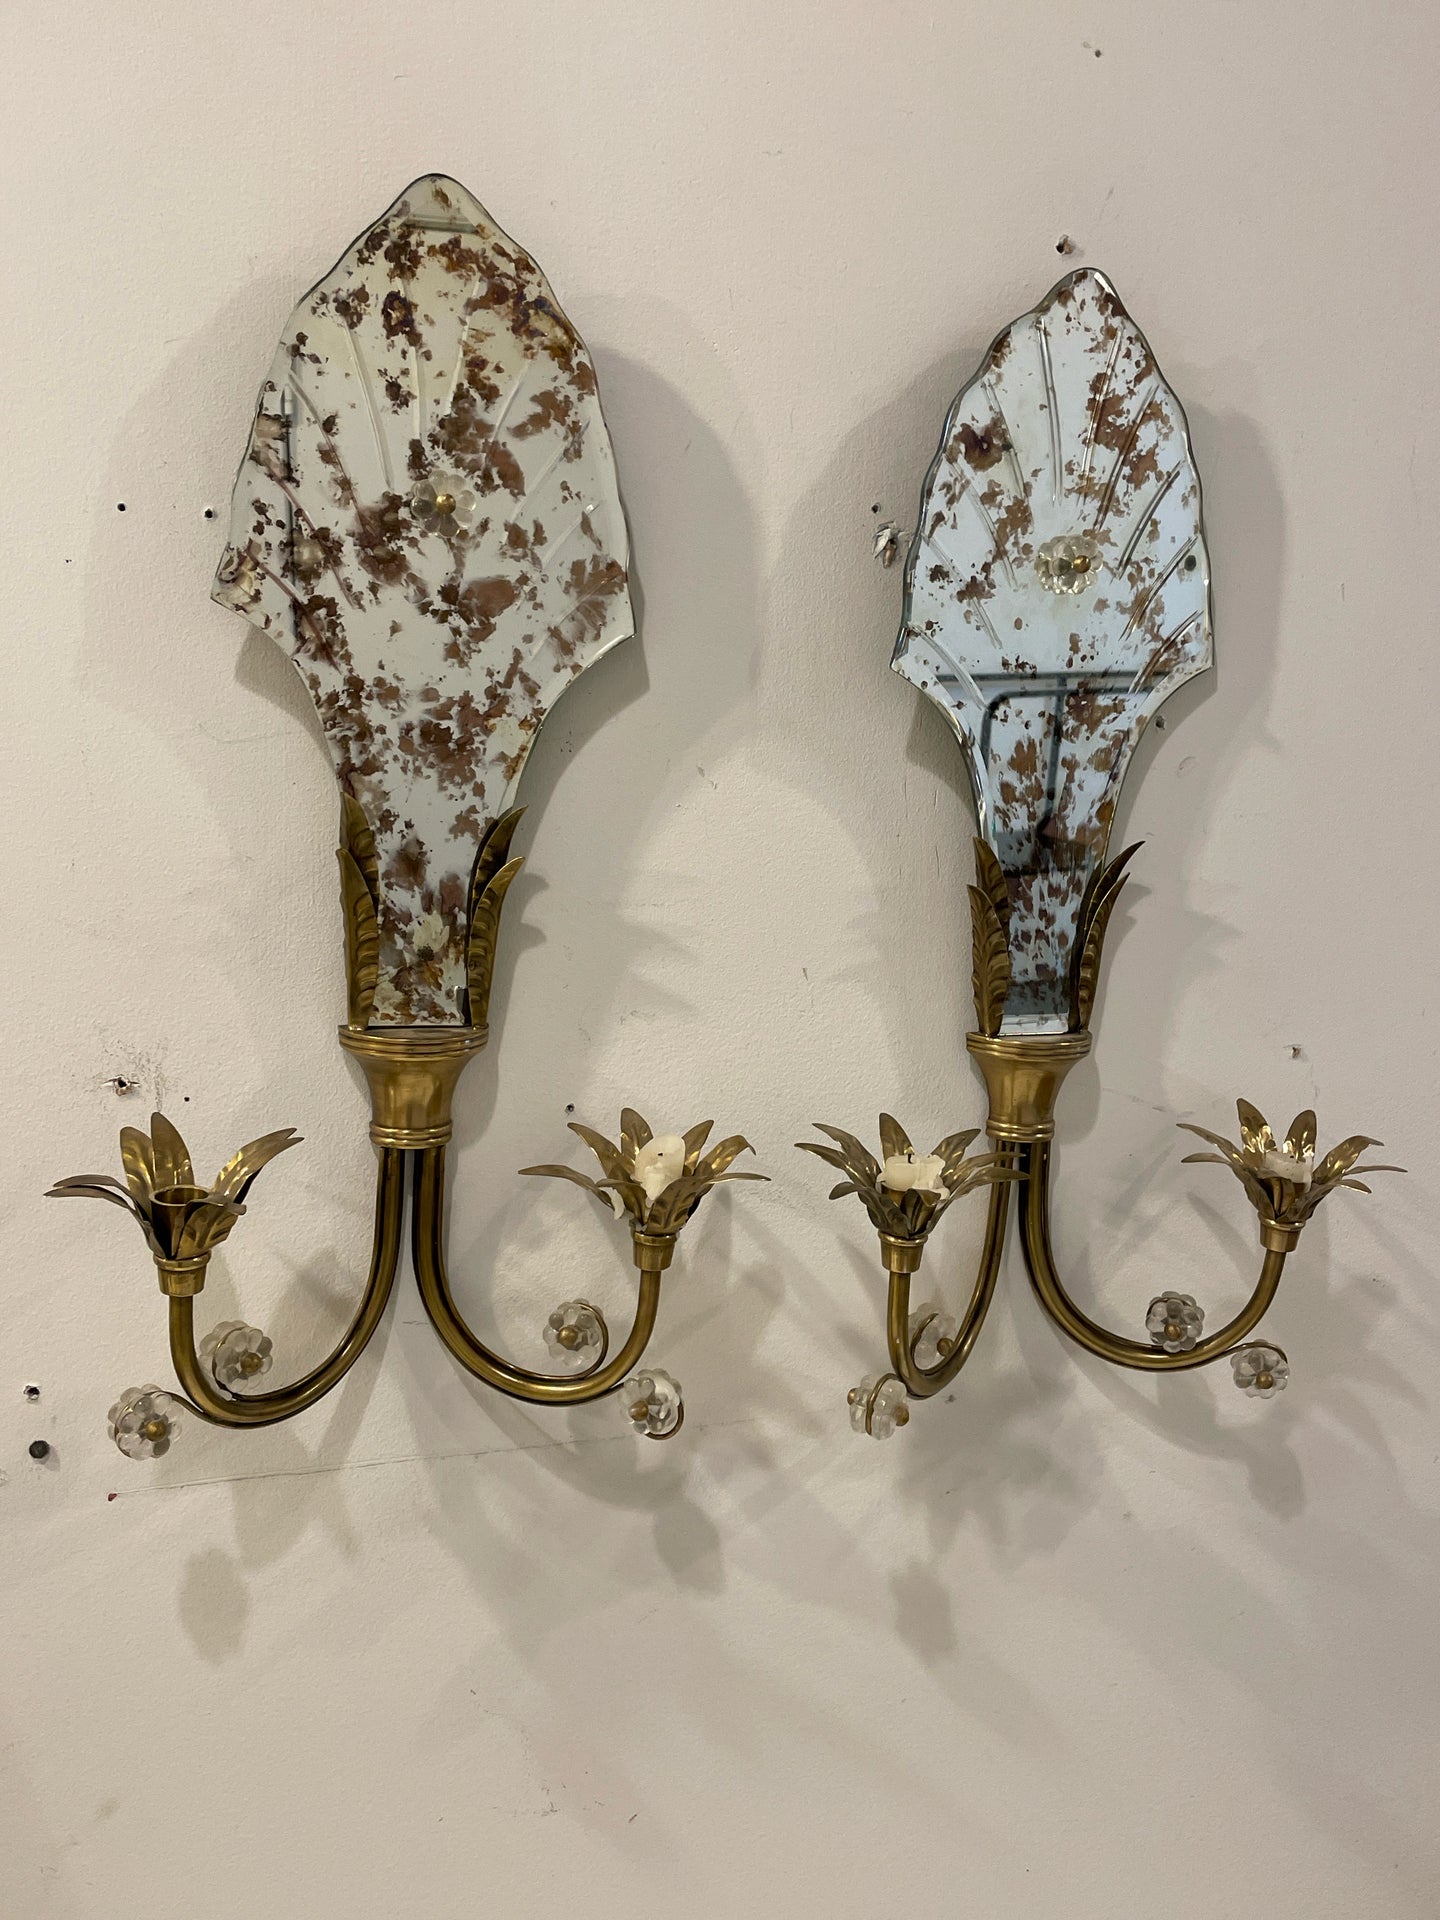 Pair of Mirrored Brass Candle Sconces